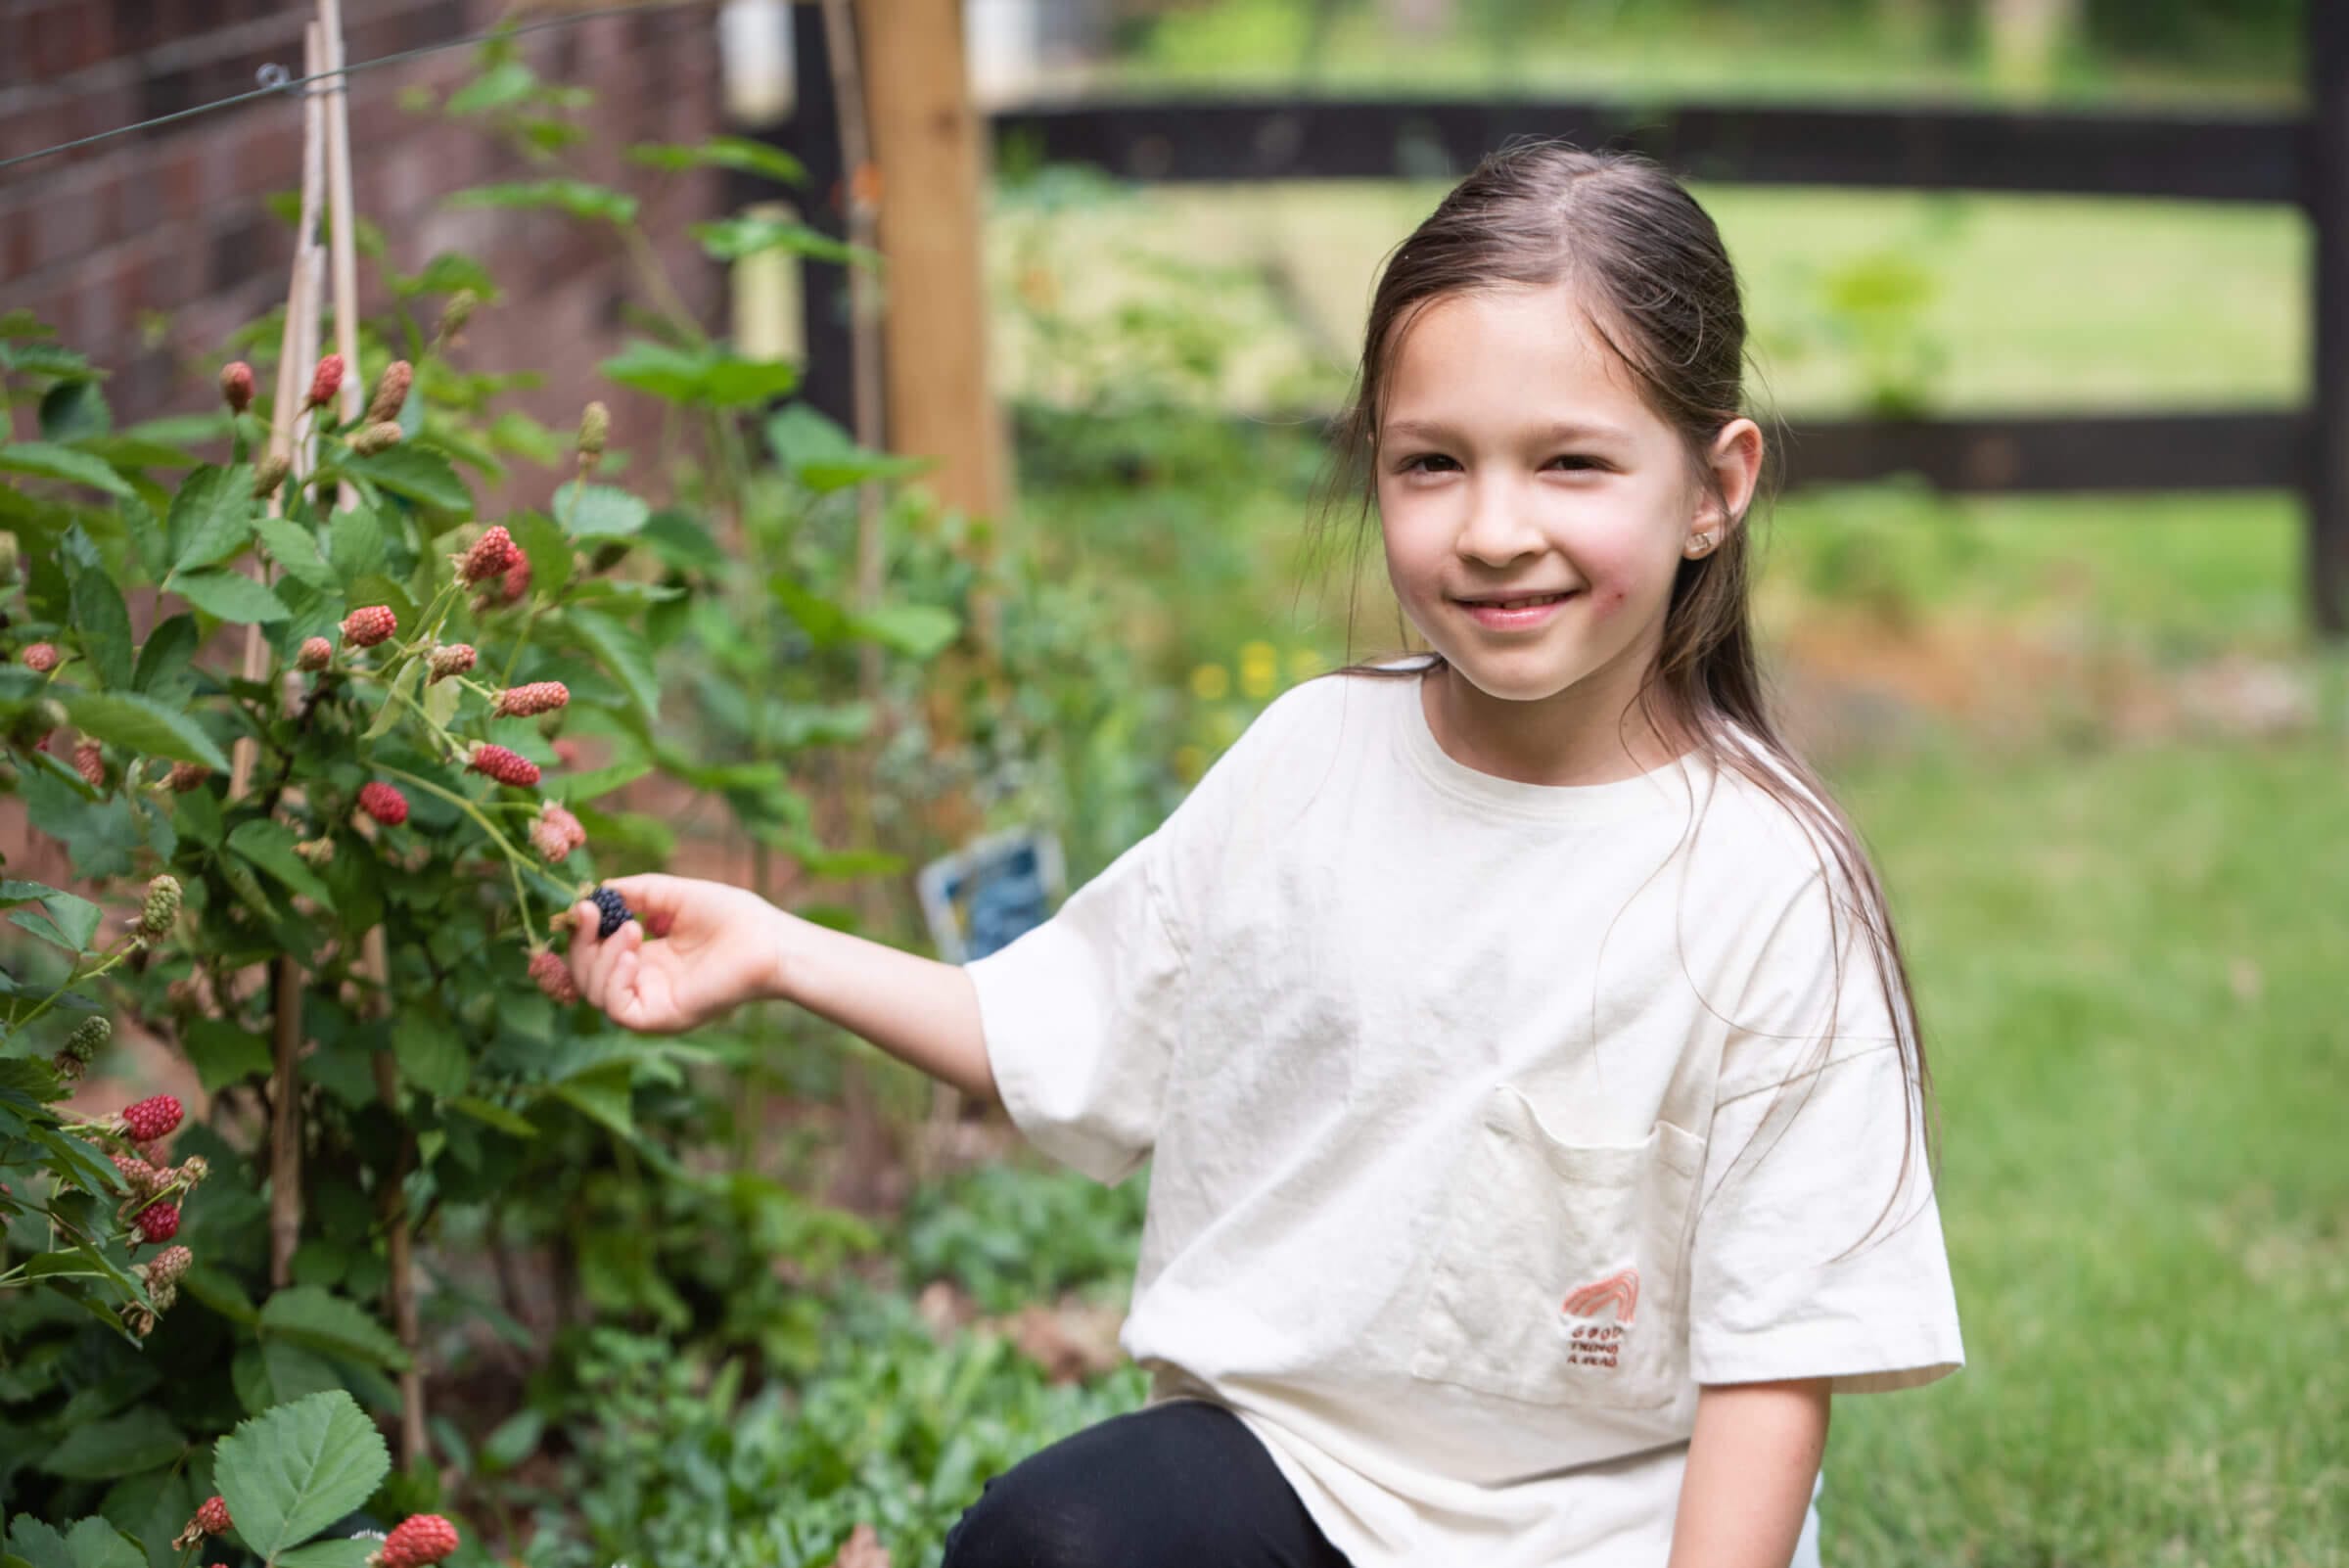 A photo of Michael Kummer's daughter Isabella picking berries.